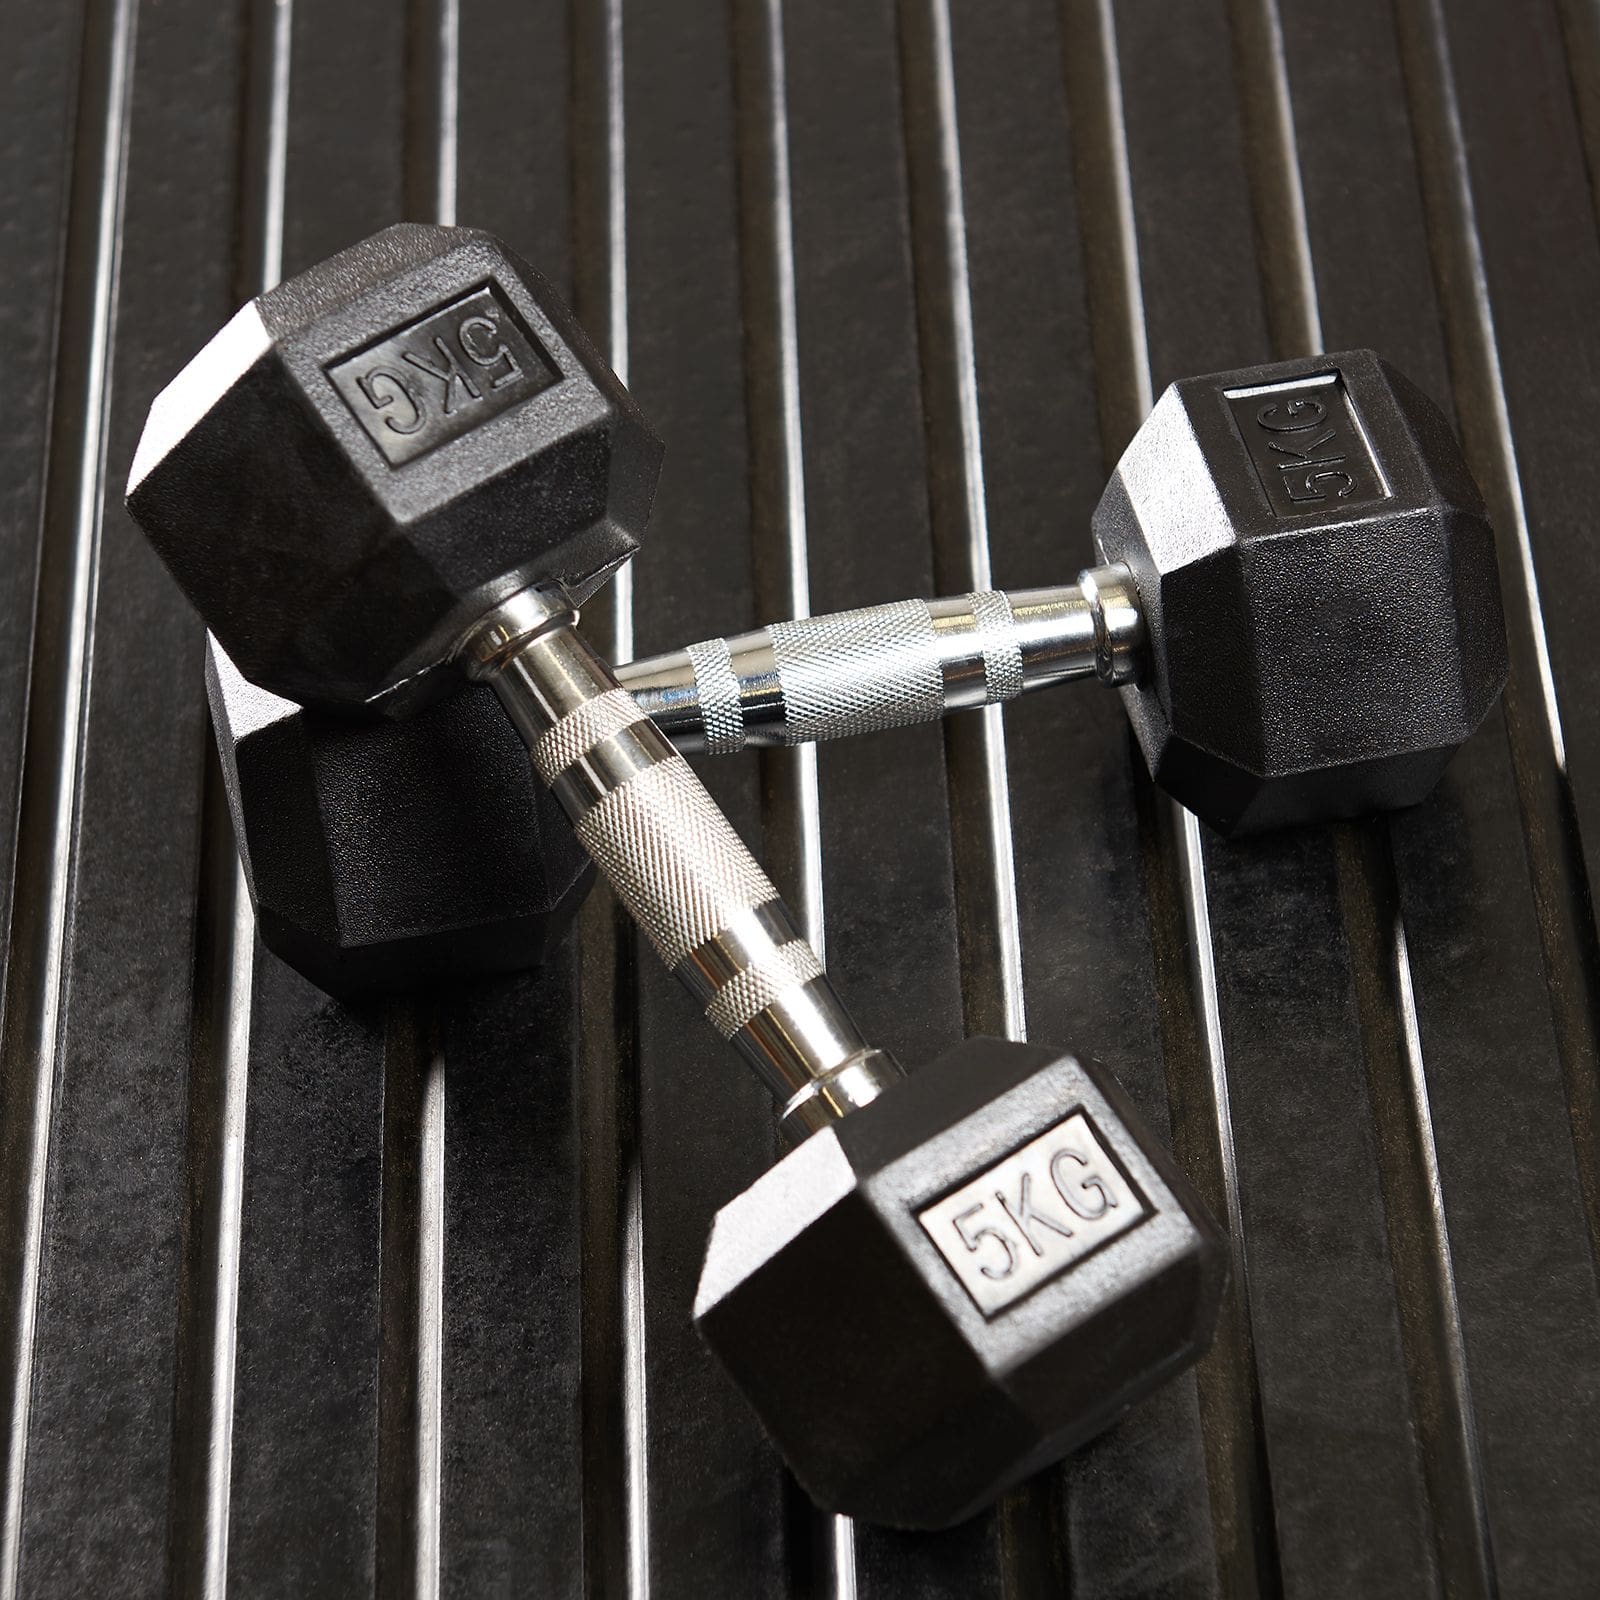 Mirafit Hex Dumbbell Review